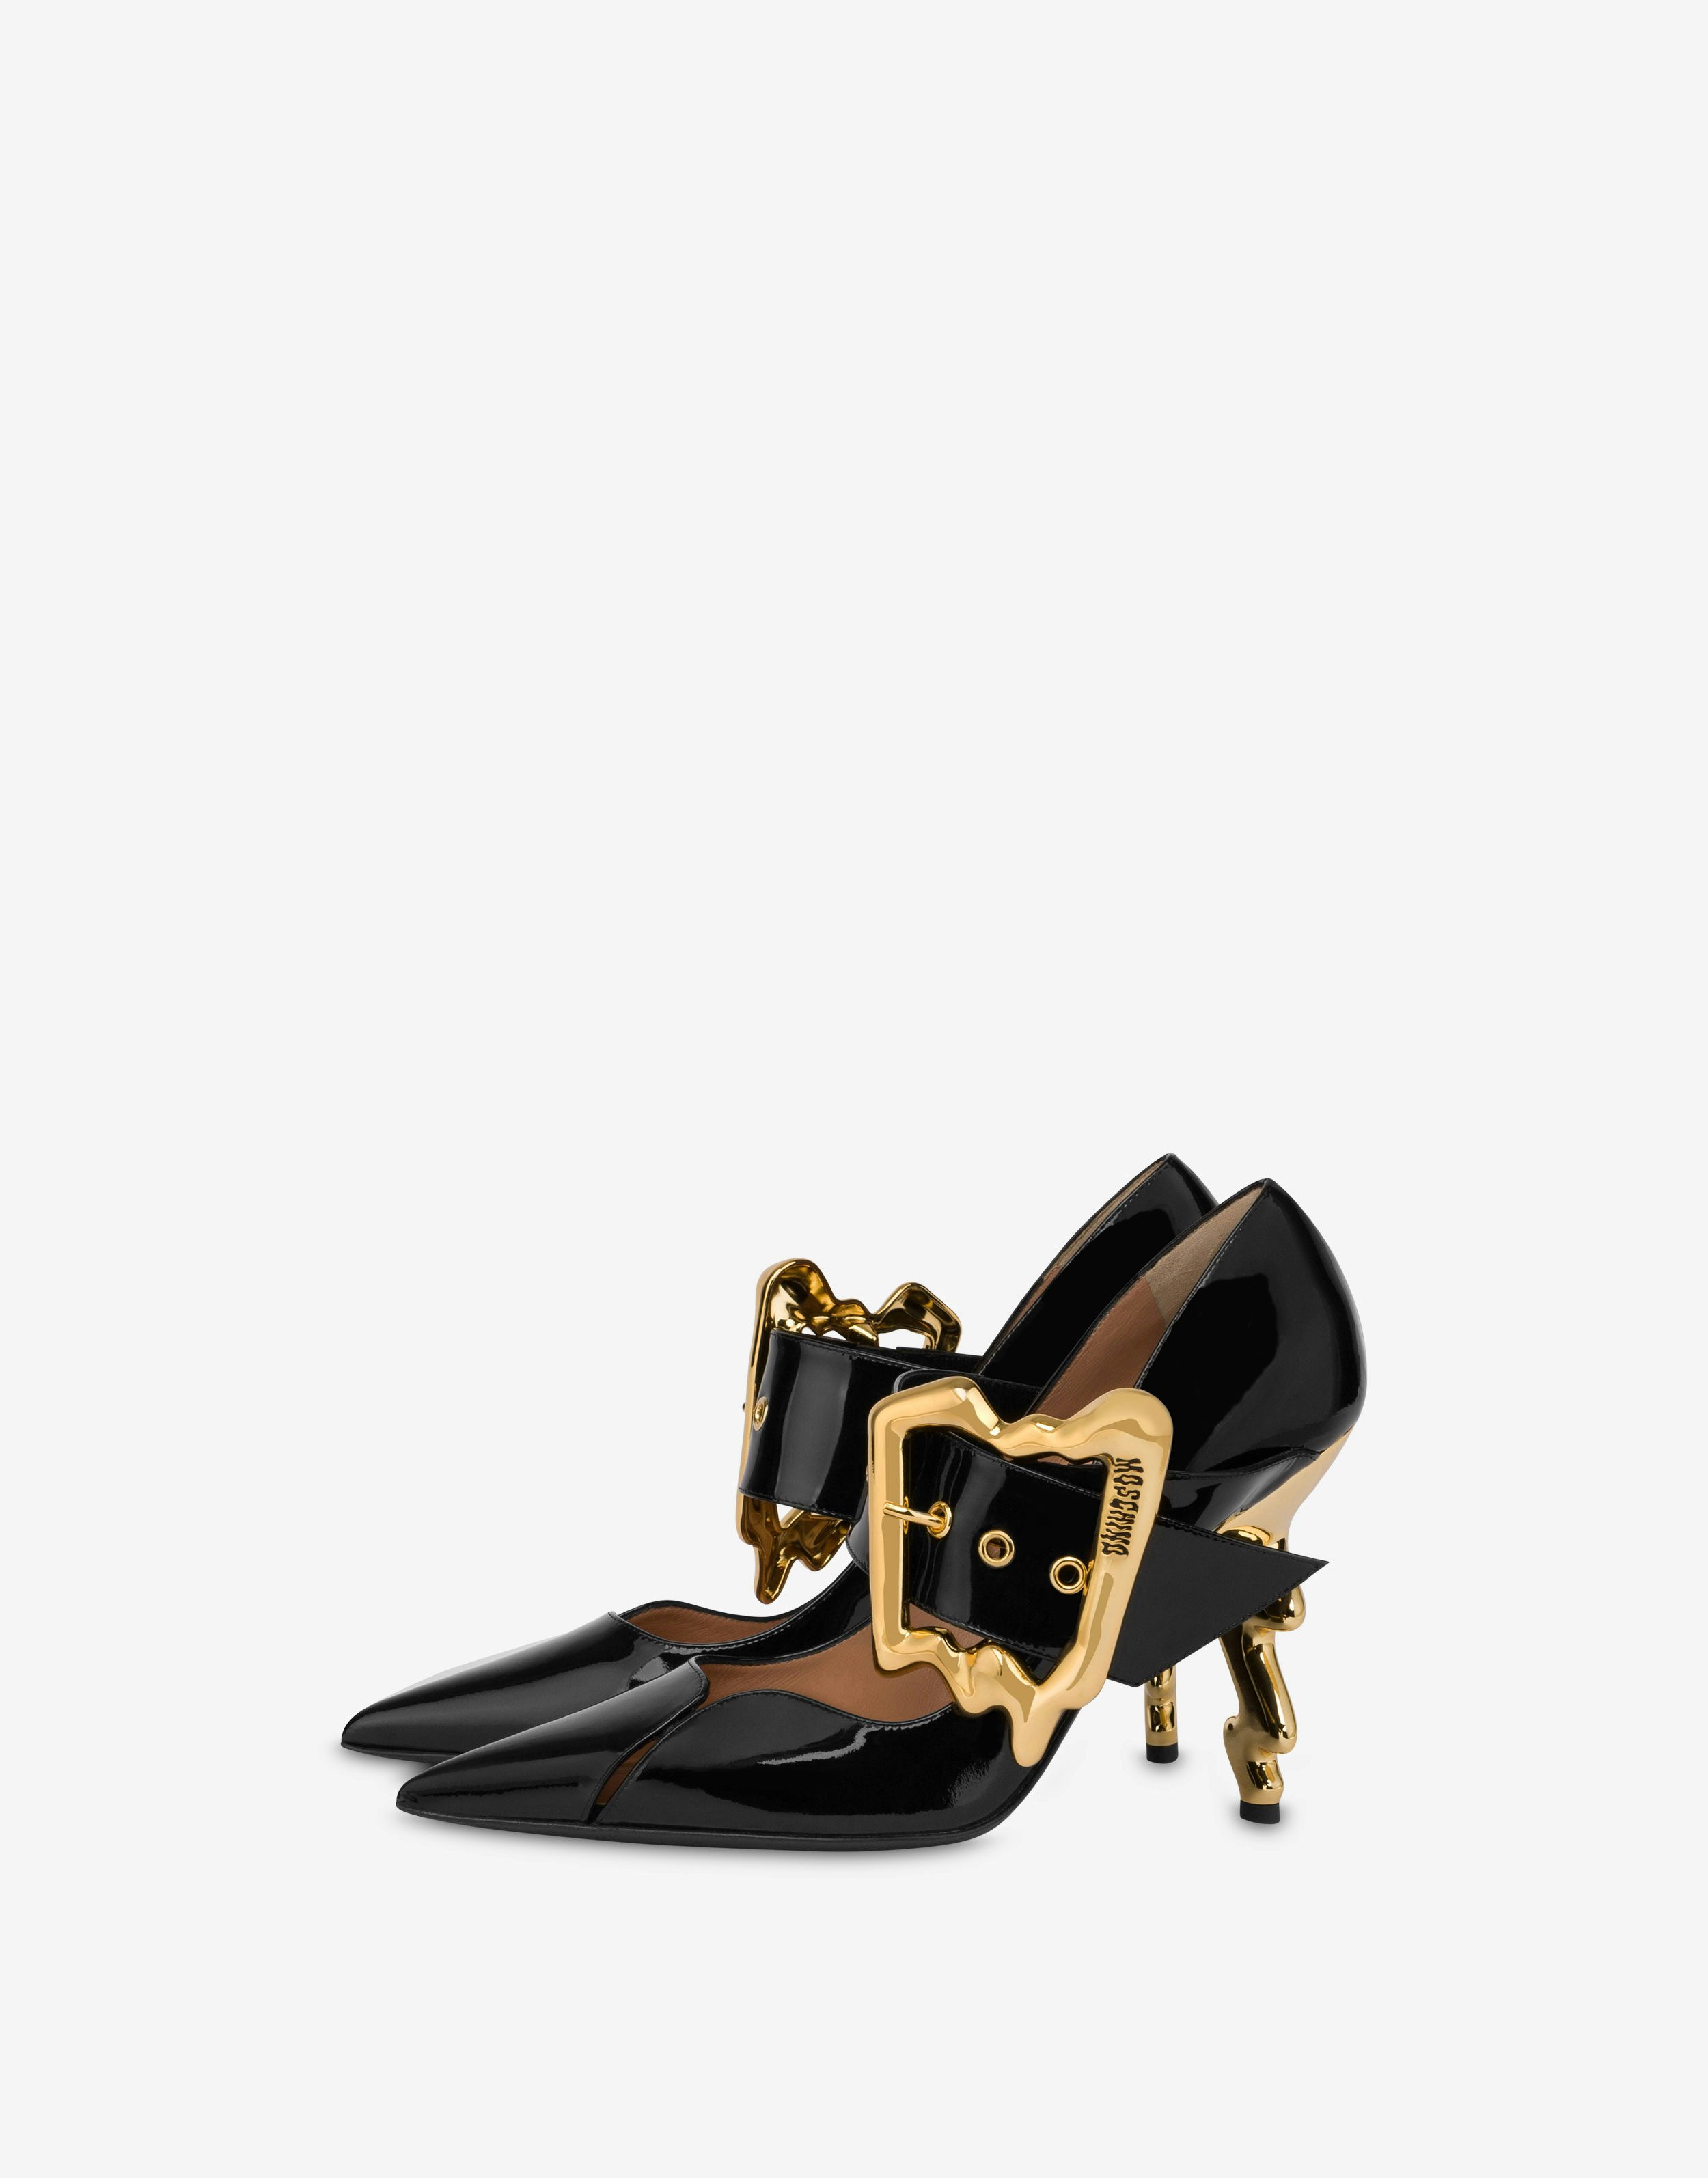 Morphed Buckle patent leather pumps